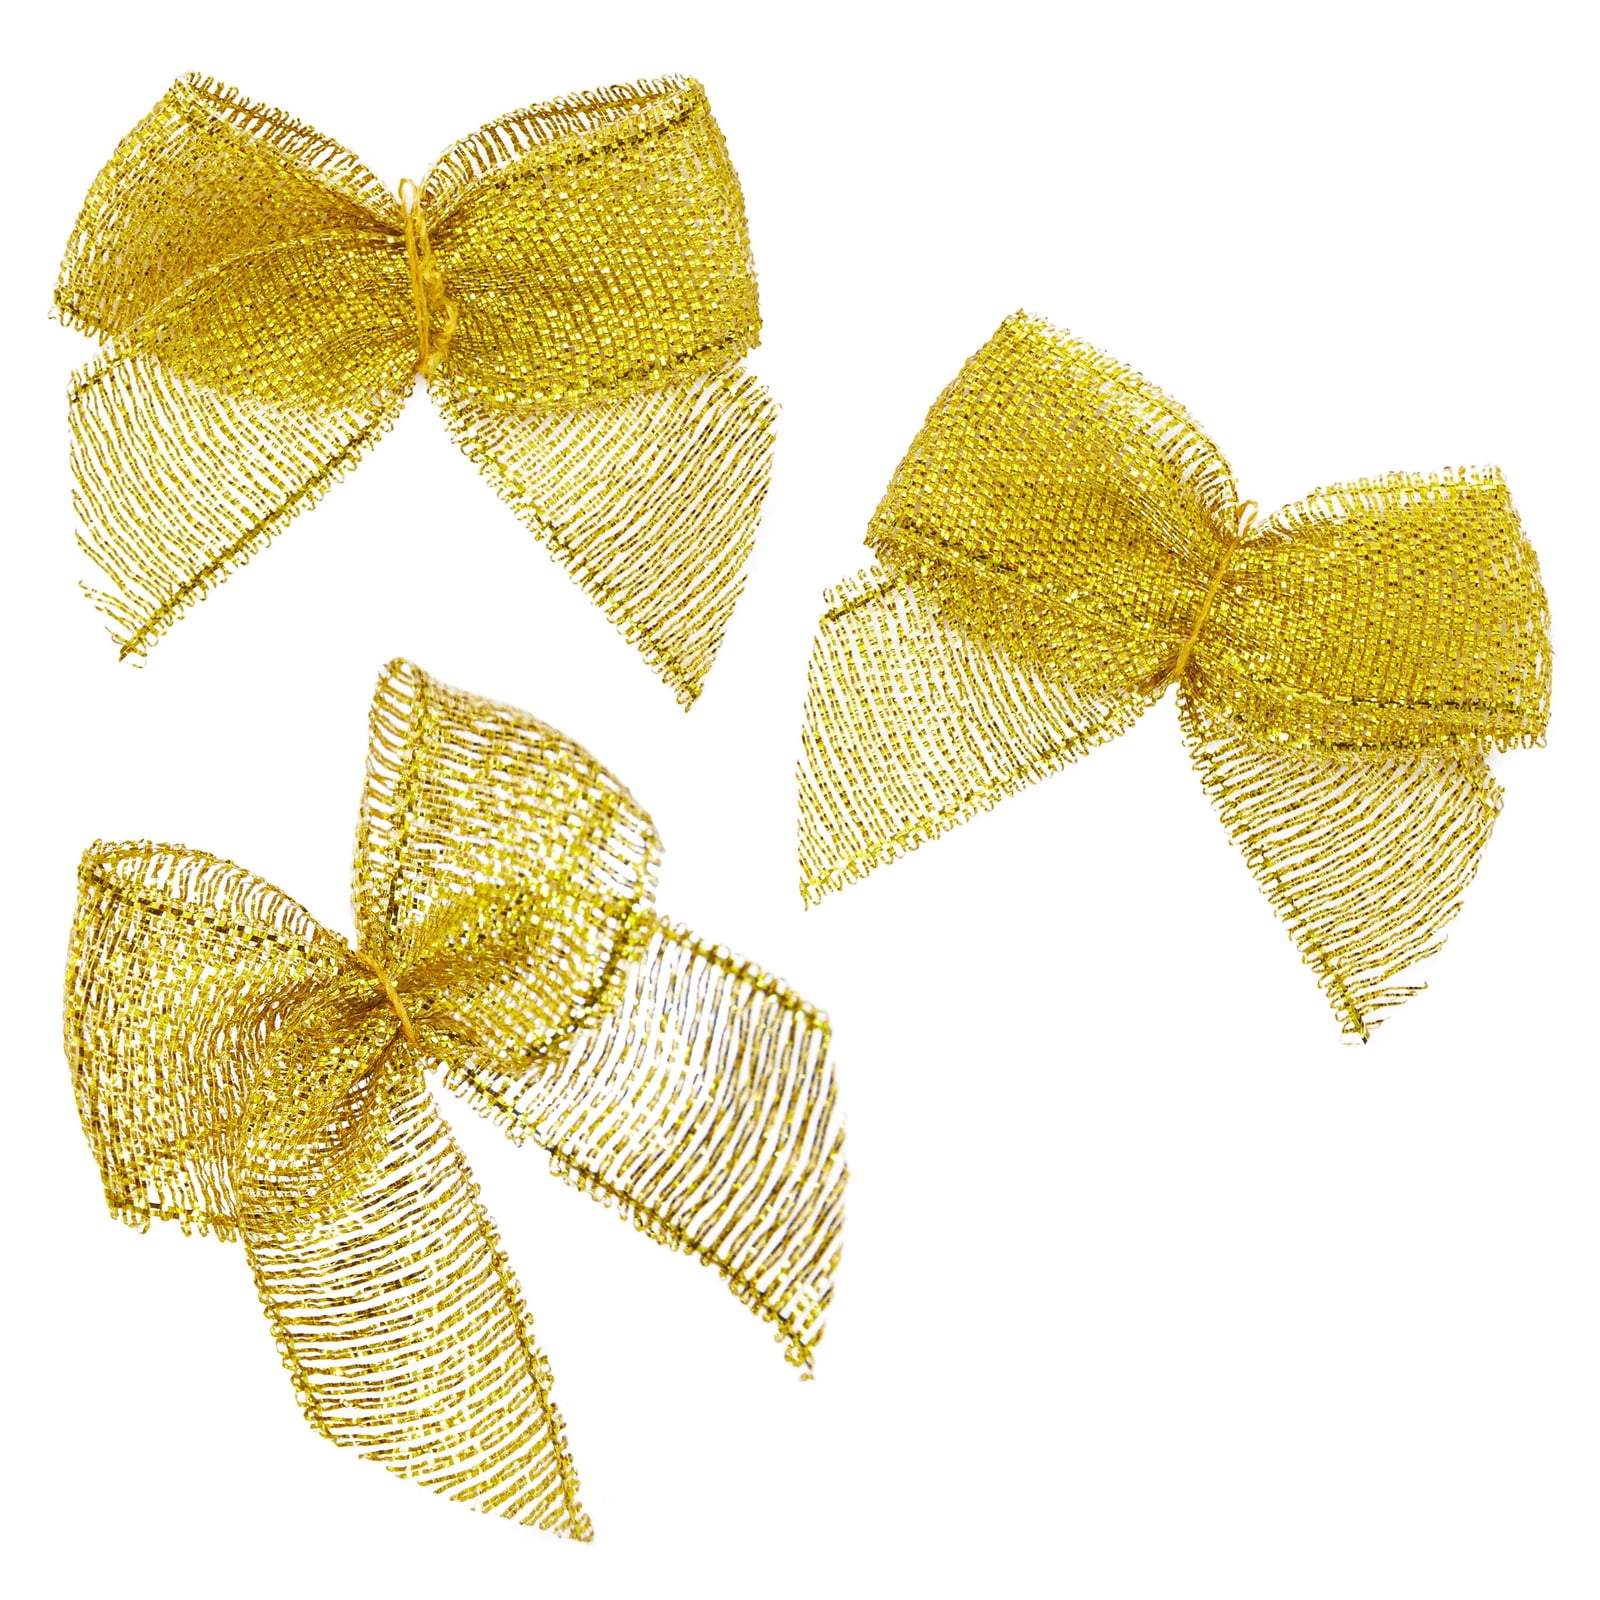 3” x 2” Pre-Tied Bow – Self-Adhesive 7/8” Gold Ribbon For 6” x 6”